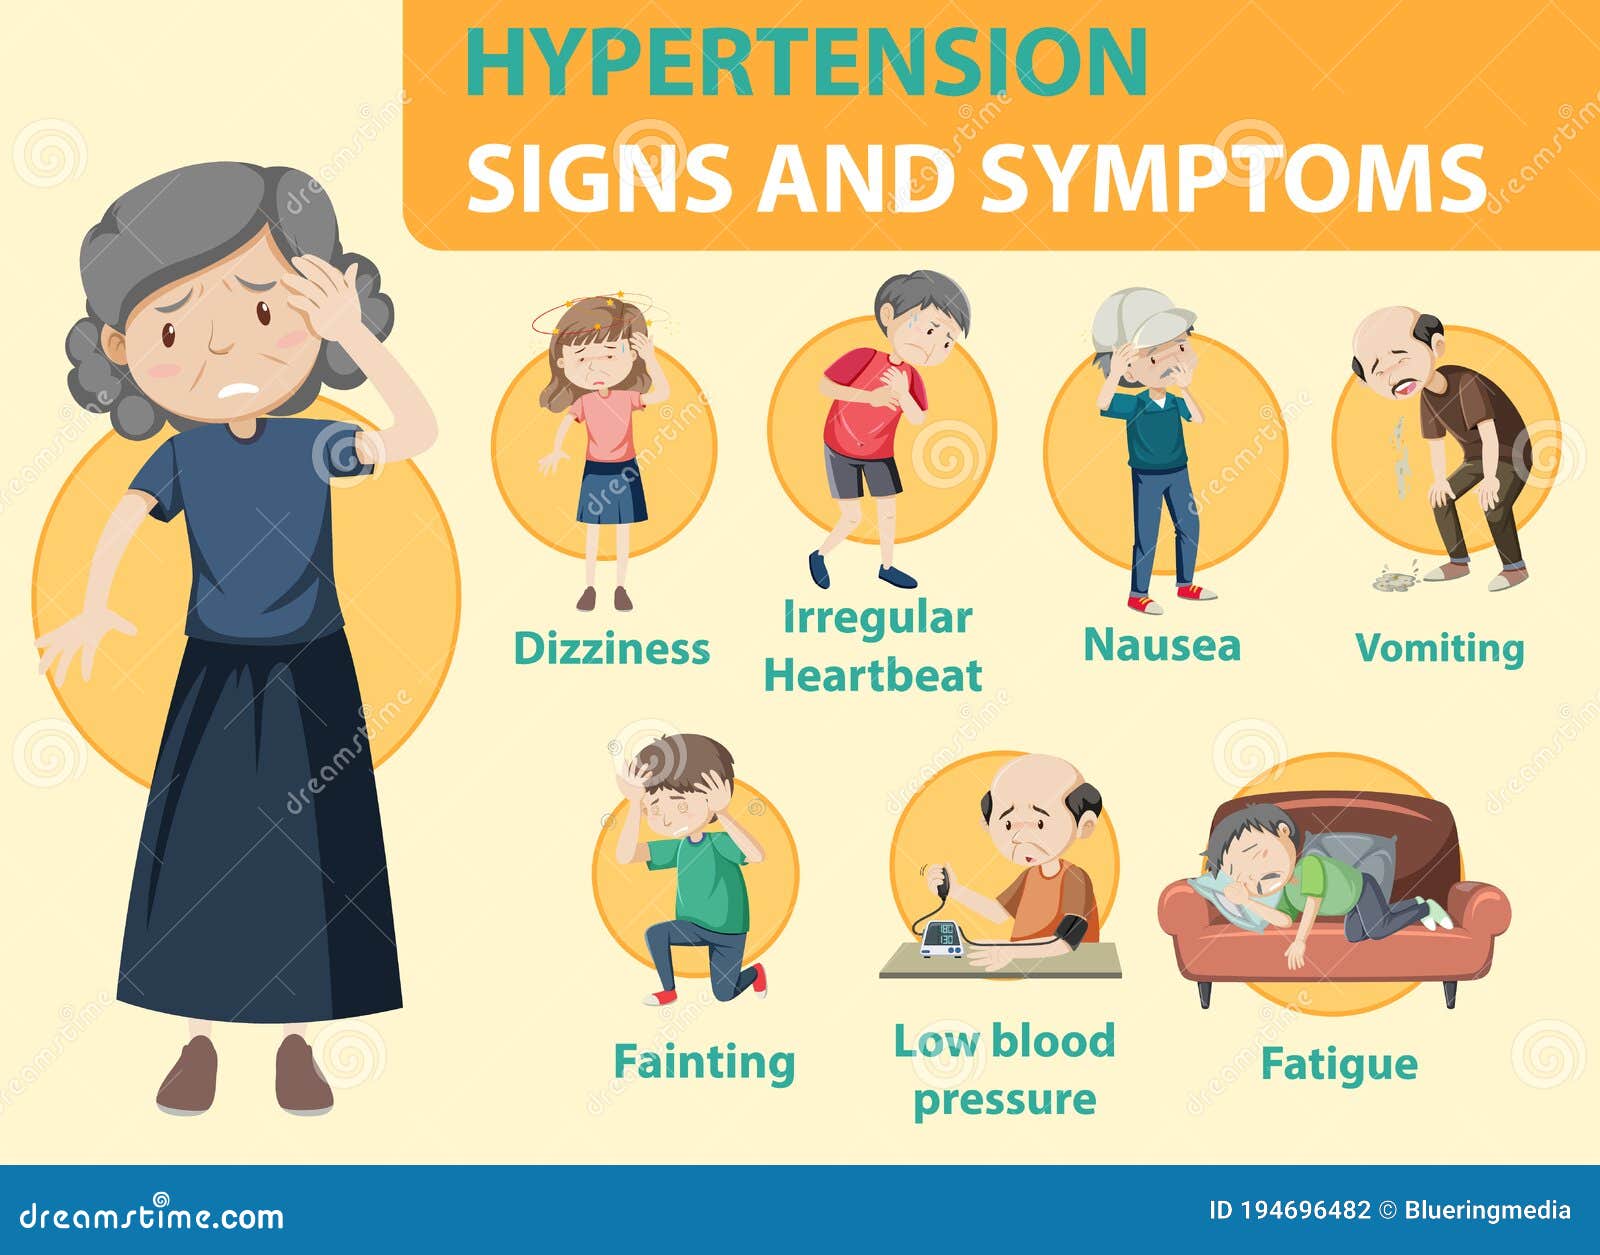 hypertension symptoms treatment and prevention)